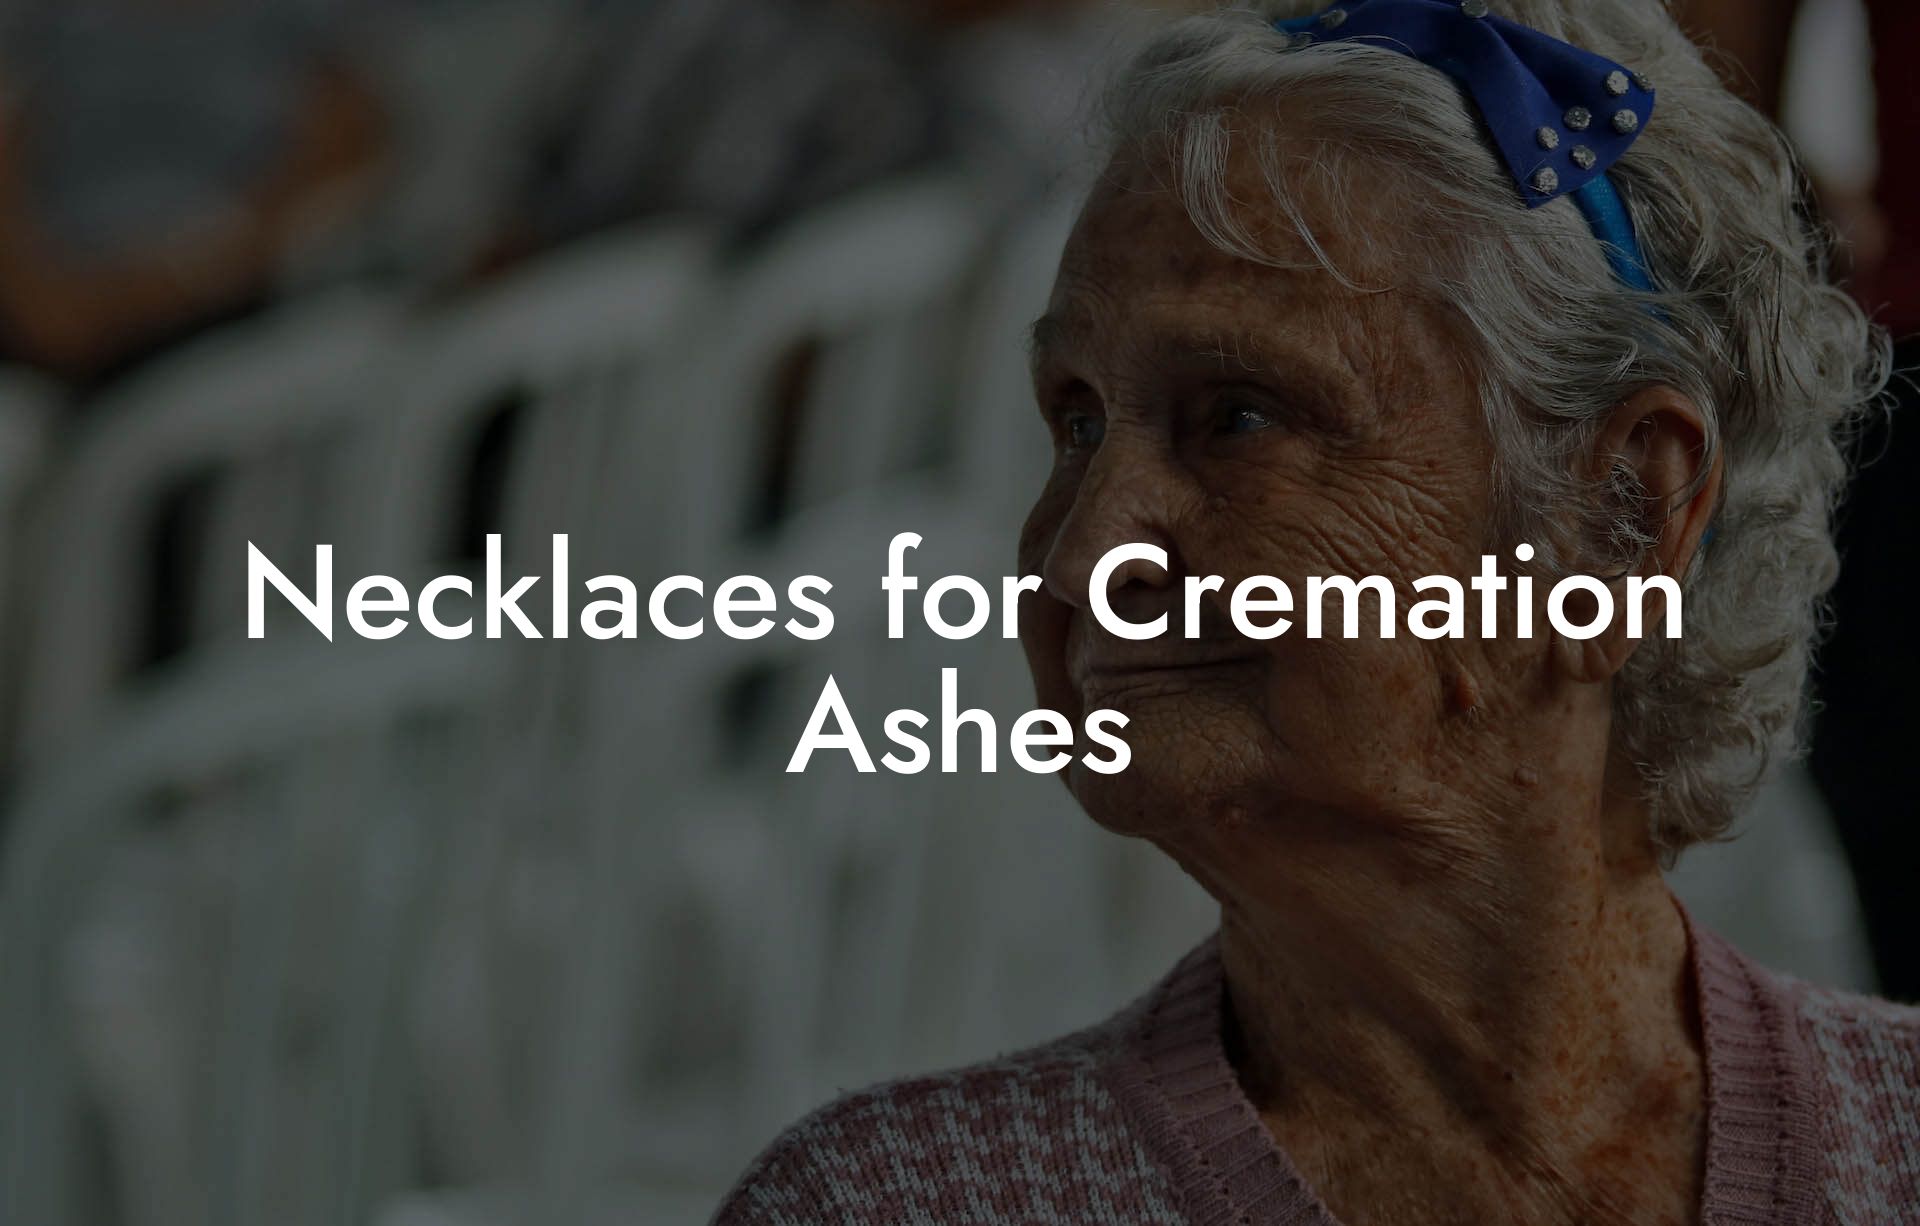 Necklaces for Cremation Ashes